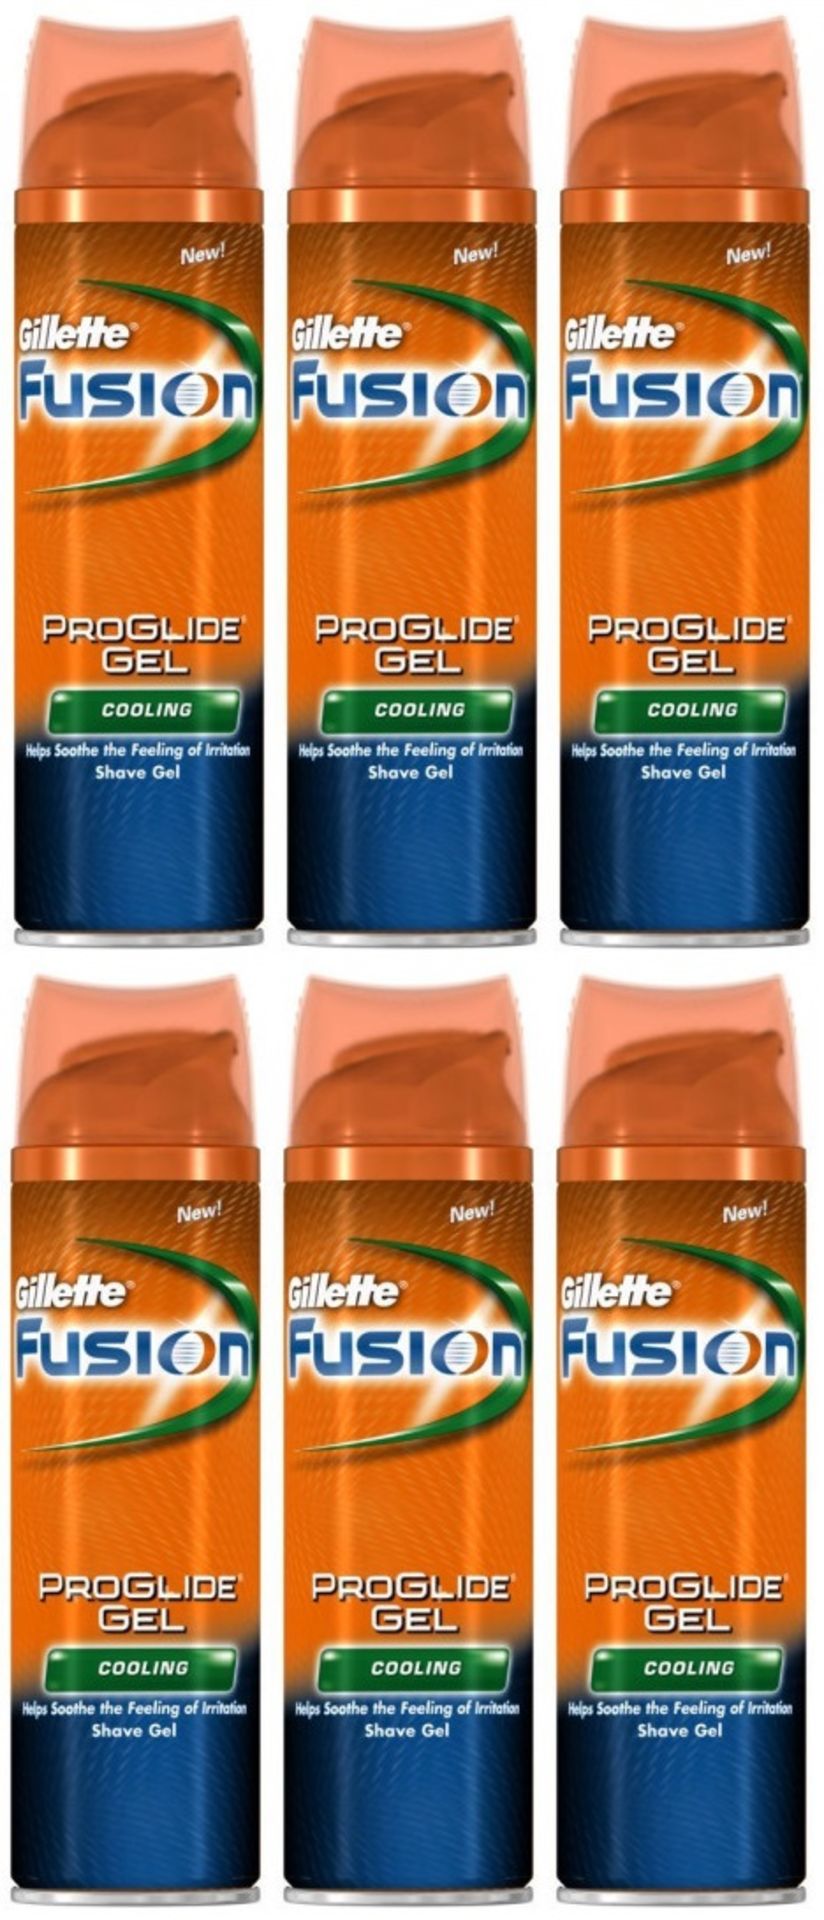 V *TRADE QTY* Brand New A Lot of Six Gillette Fusion Shaving Gel 200ml - Cooling - Hydra Gel - (